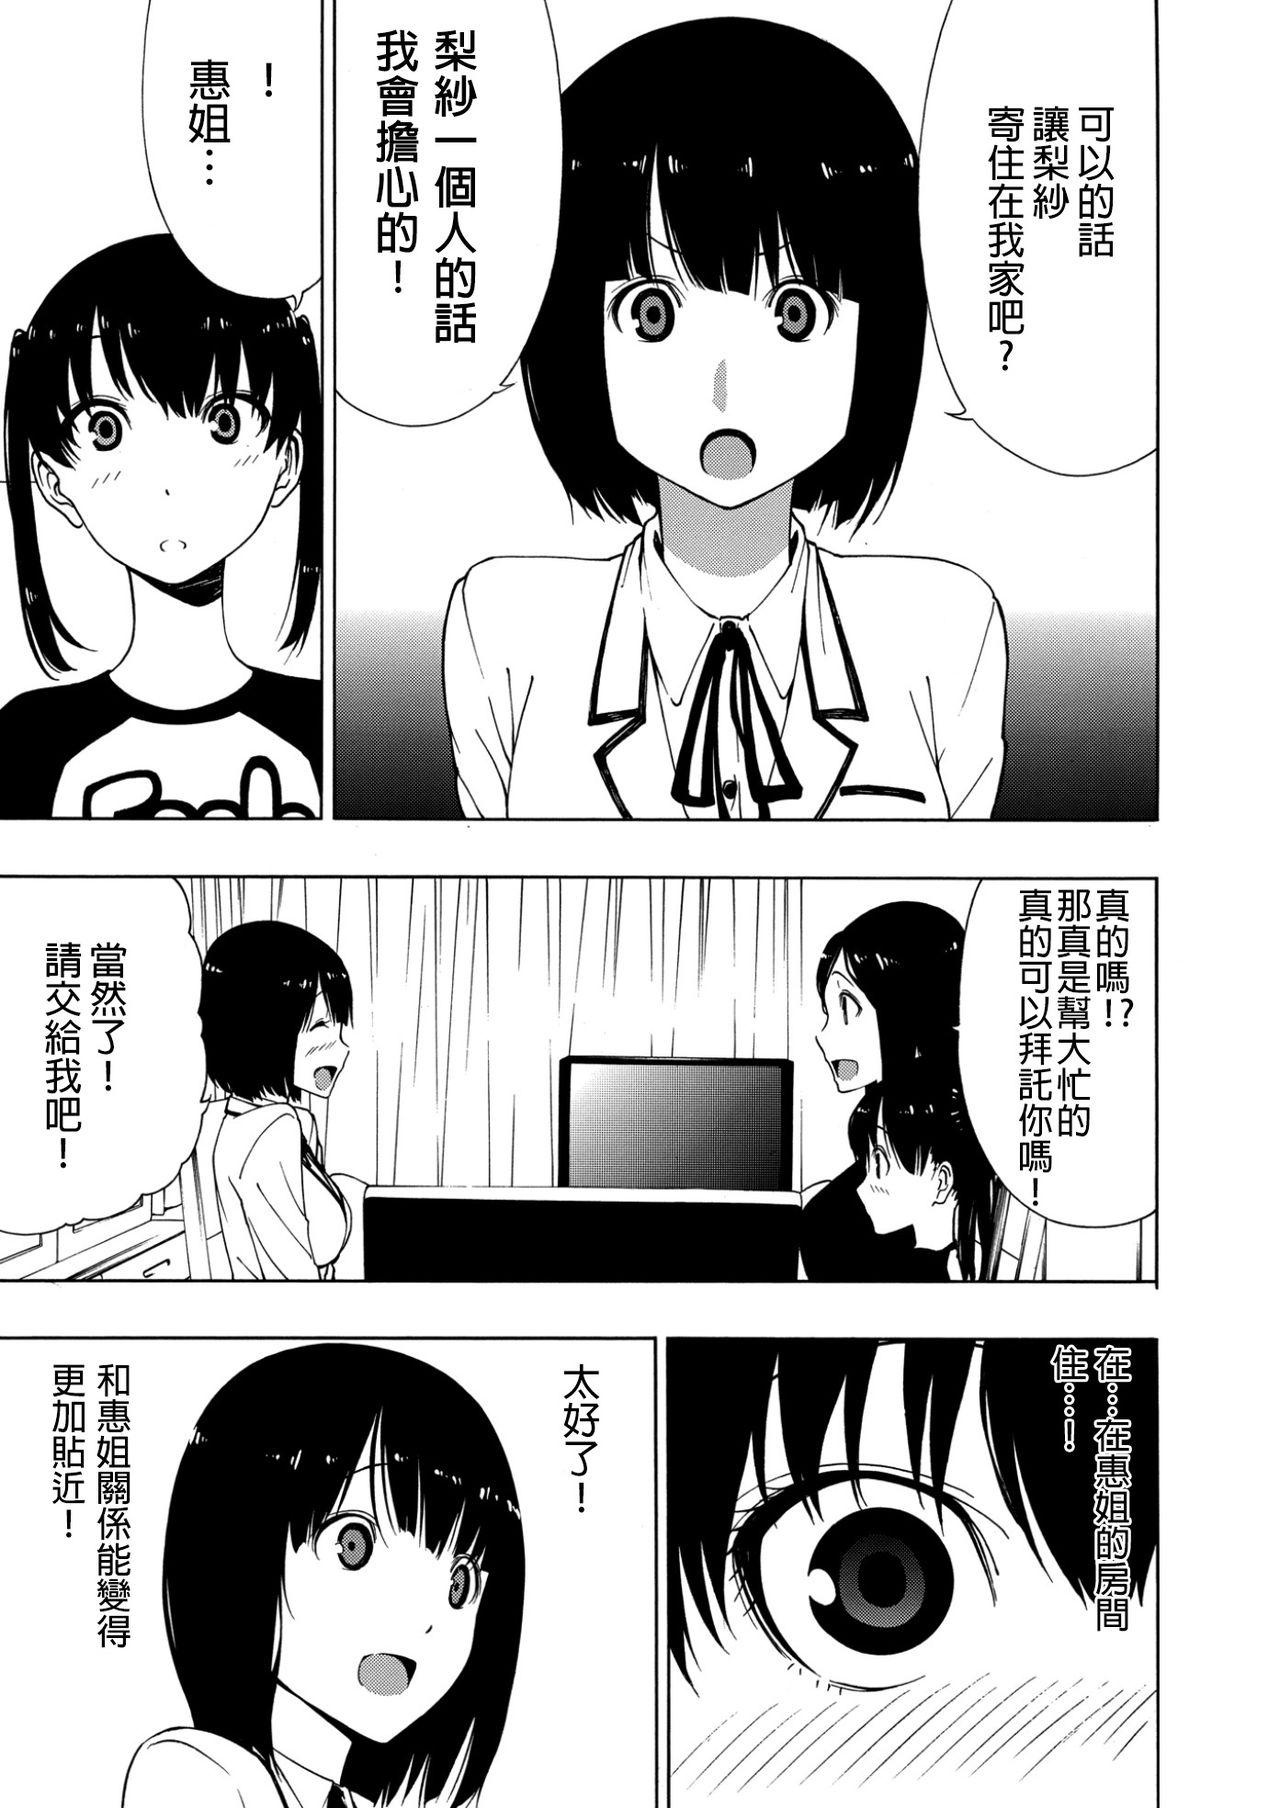 Reversecowgirl Akogare no Onee-san | 憧憬的姐姐 Doctor - Page 6